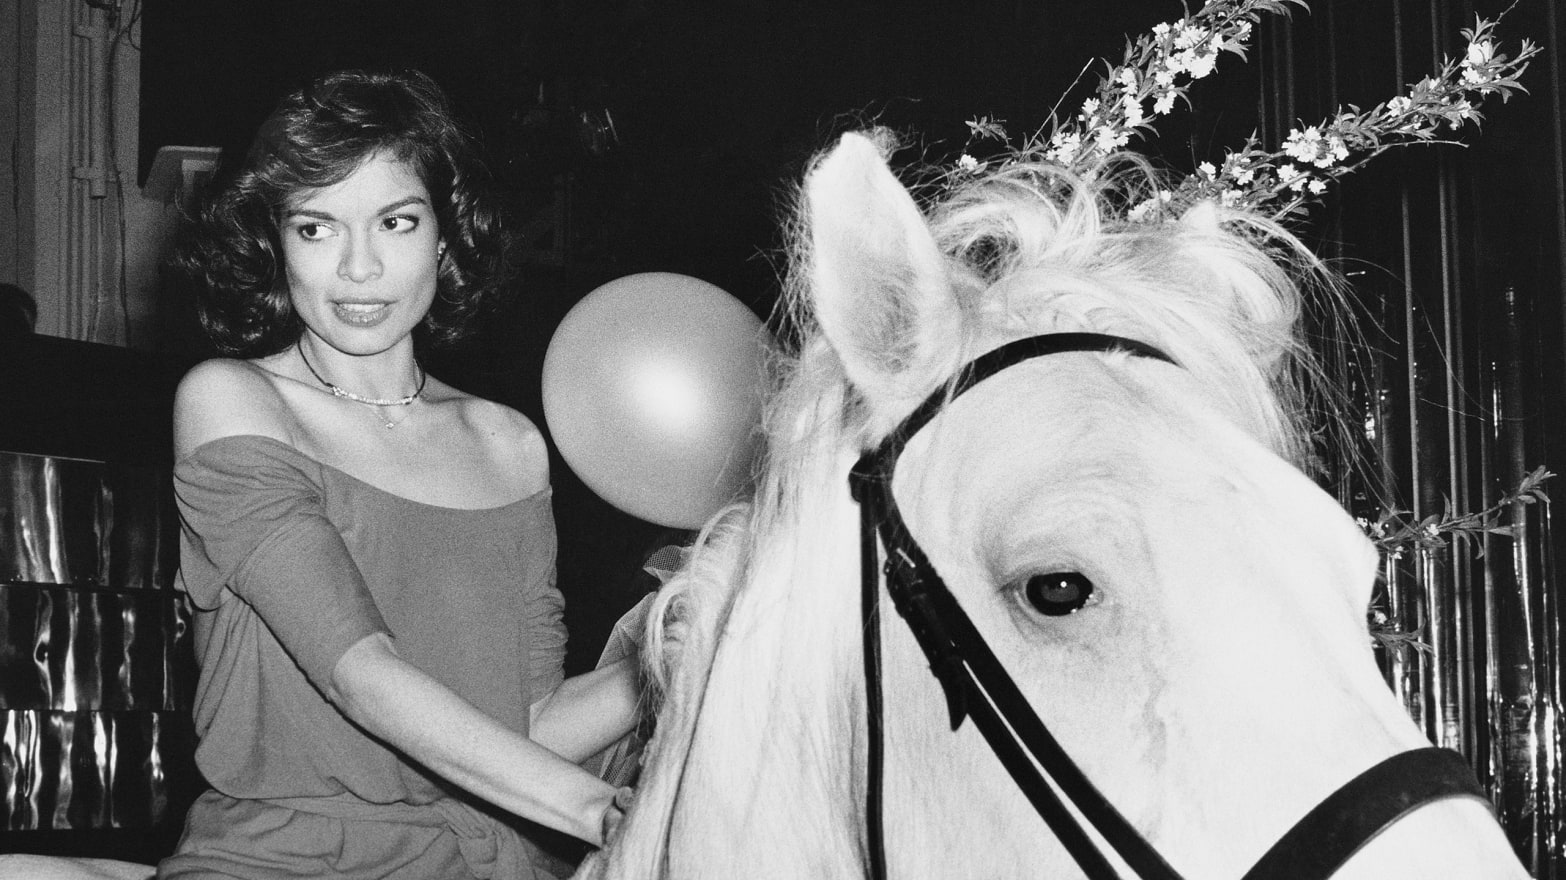 Will We Ever See Studio 54 Again?